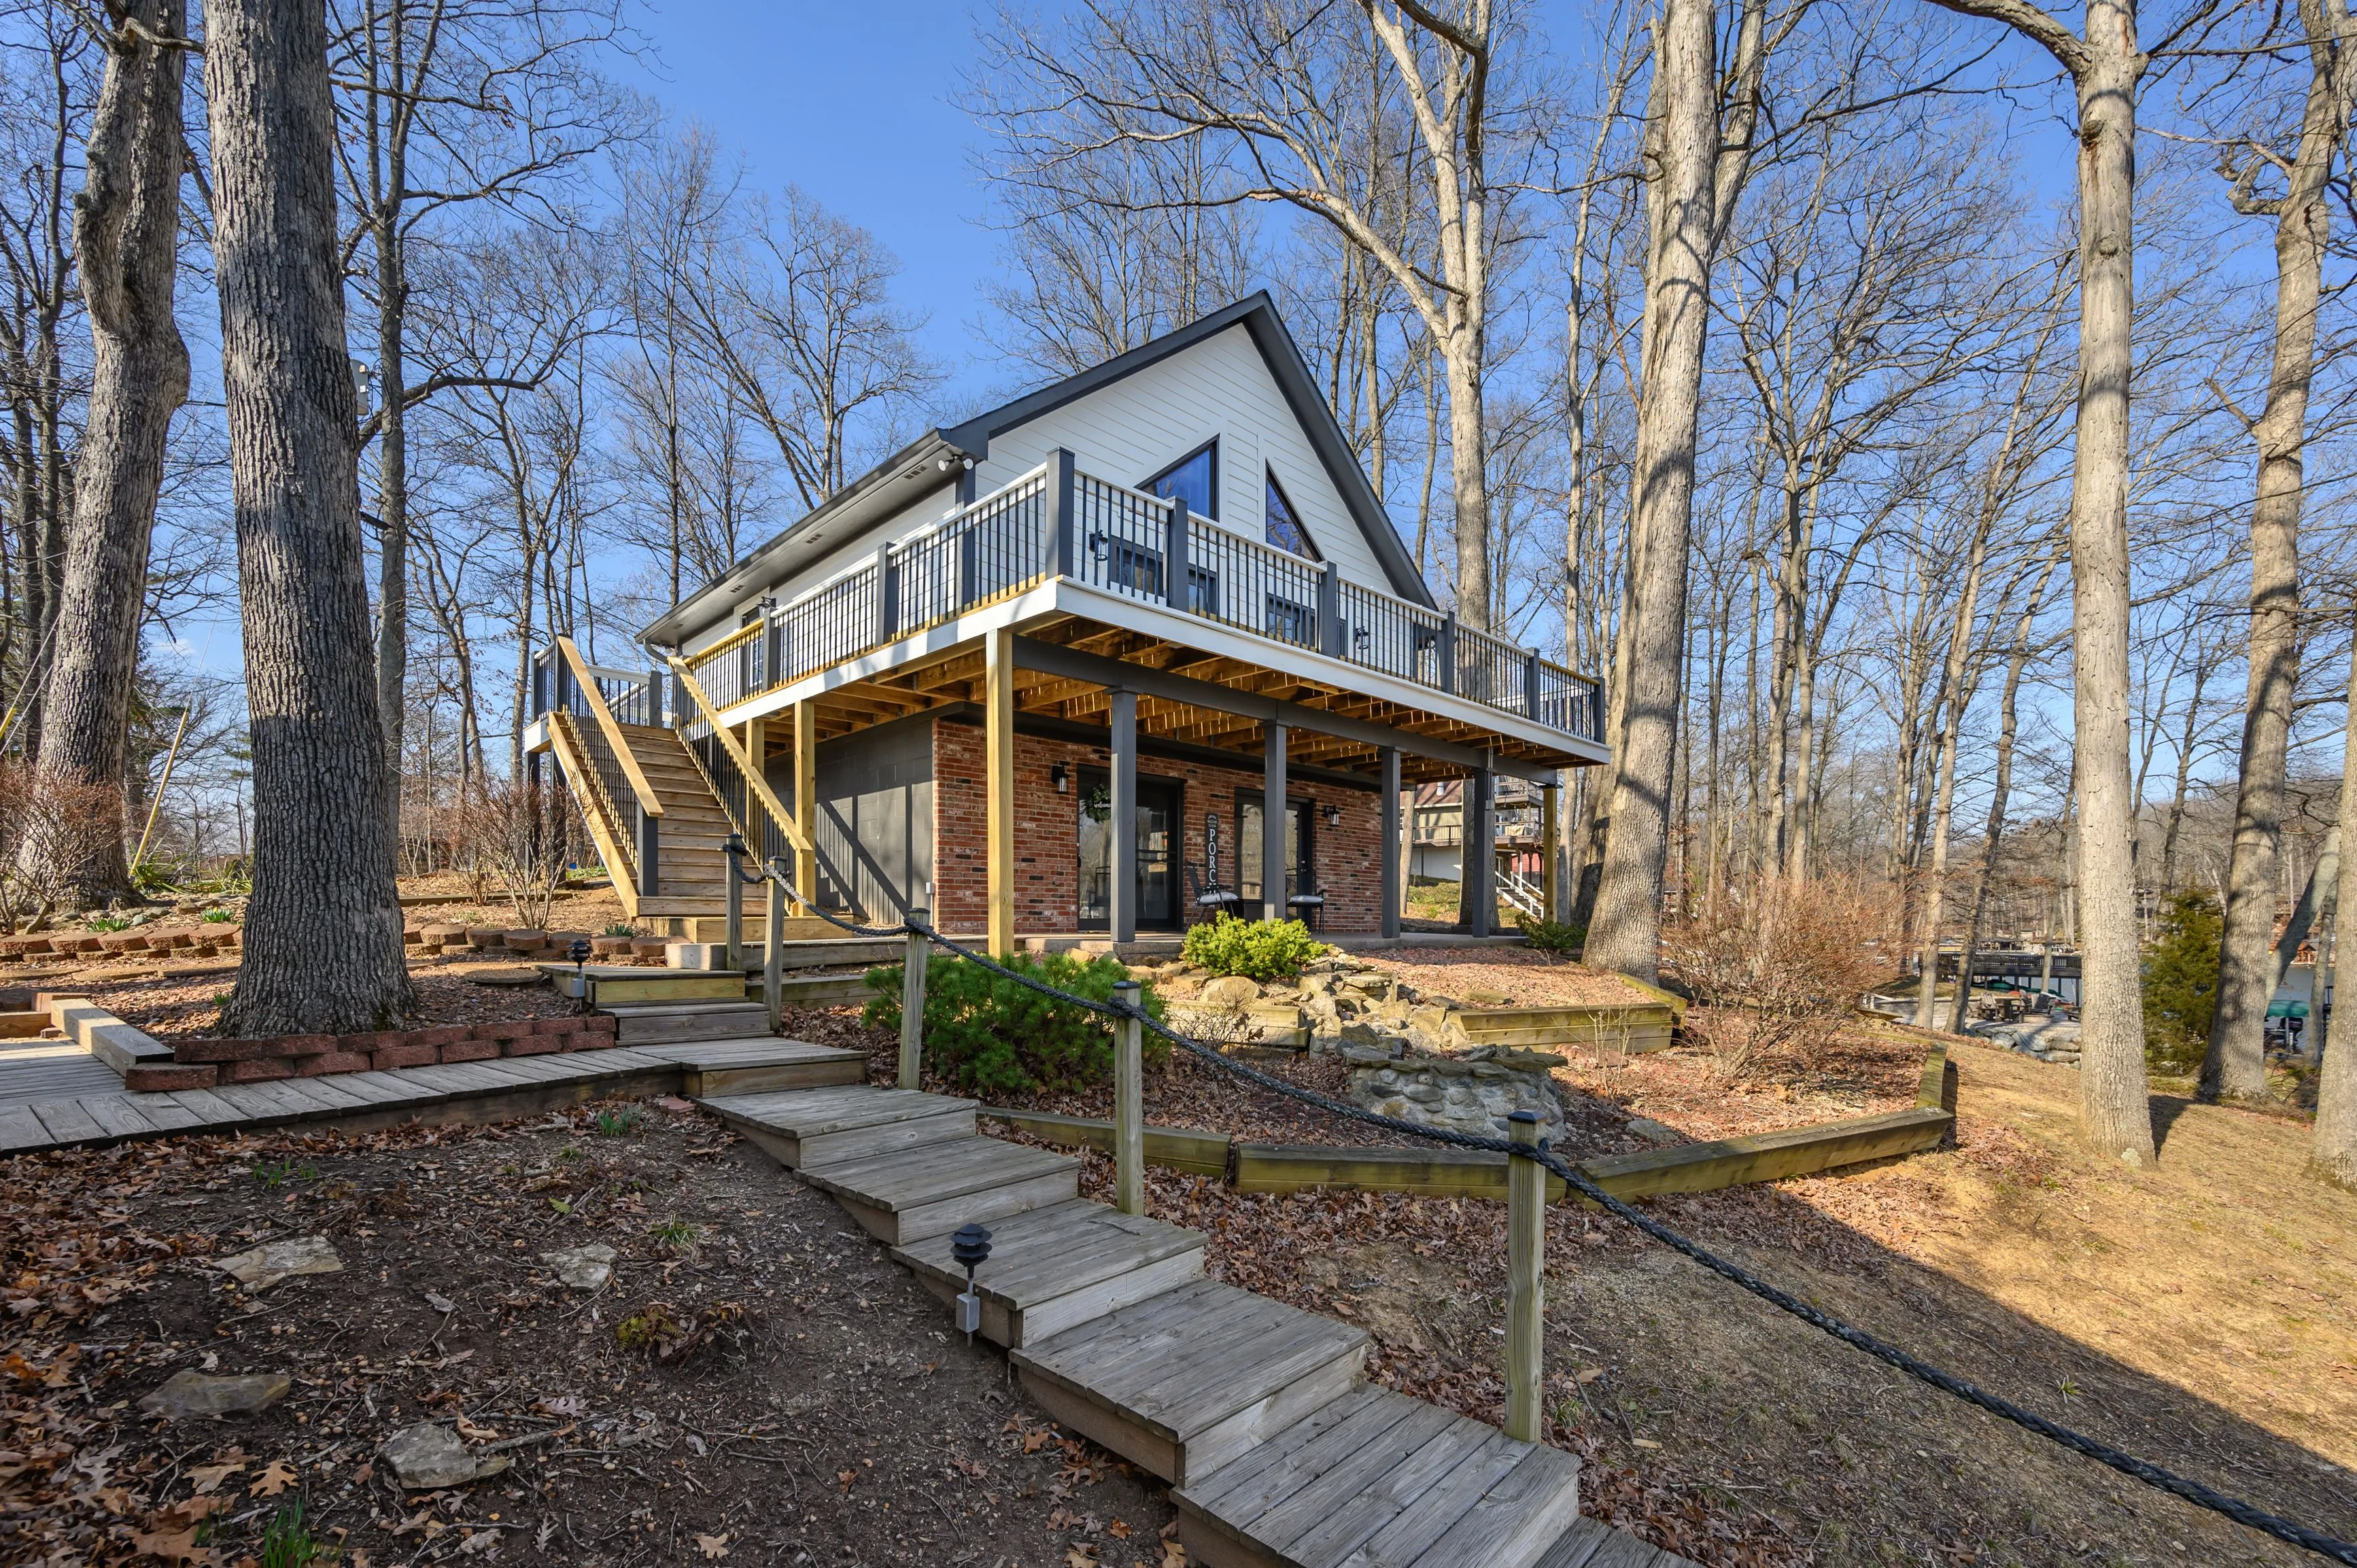  A cozy two-story house nestled among bare trees with a staircase leading to the front porch, showcasing clear blue skies in the background.